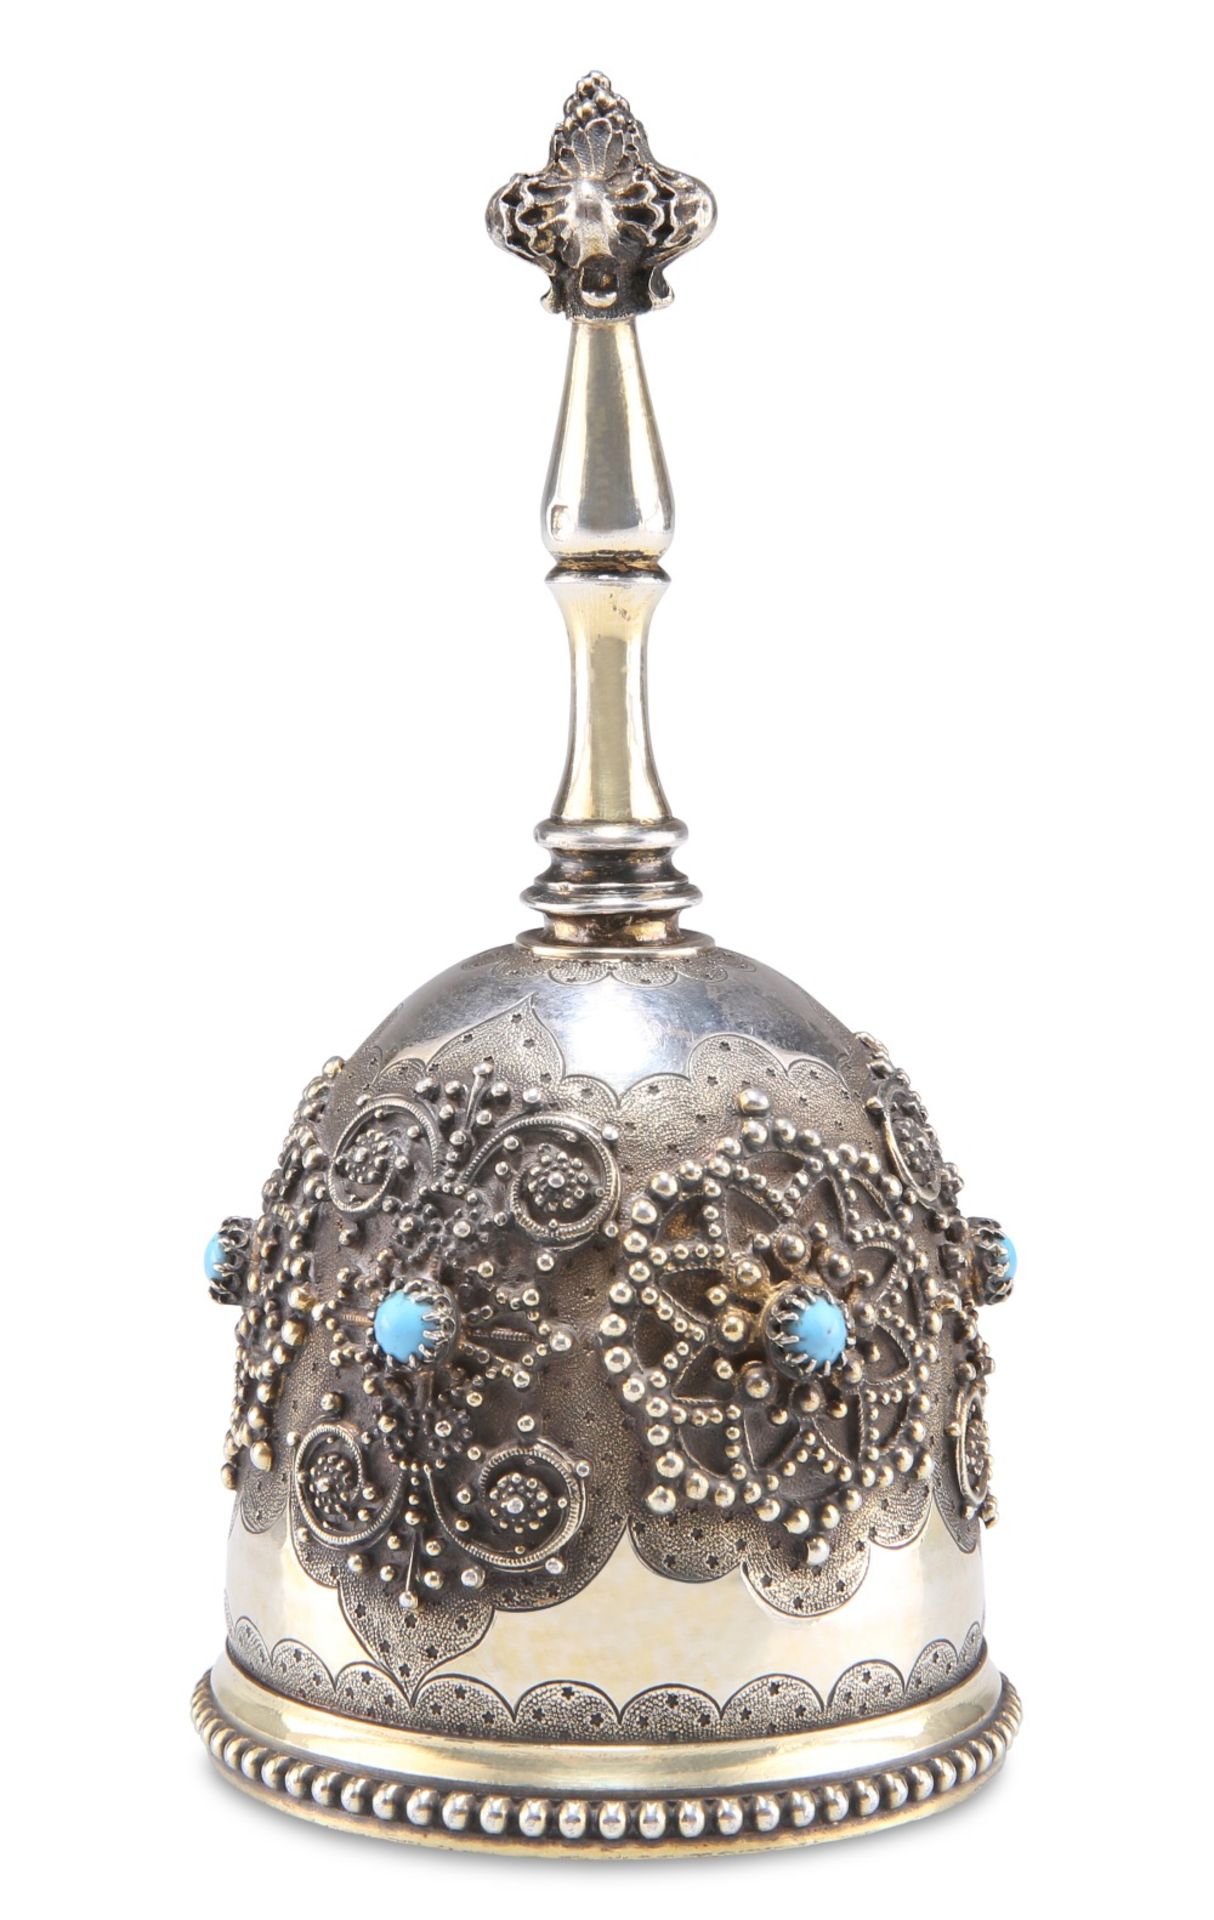 A FINE 19TH CENTURY FRENCH SILVER-GILT TABLE BELL